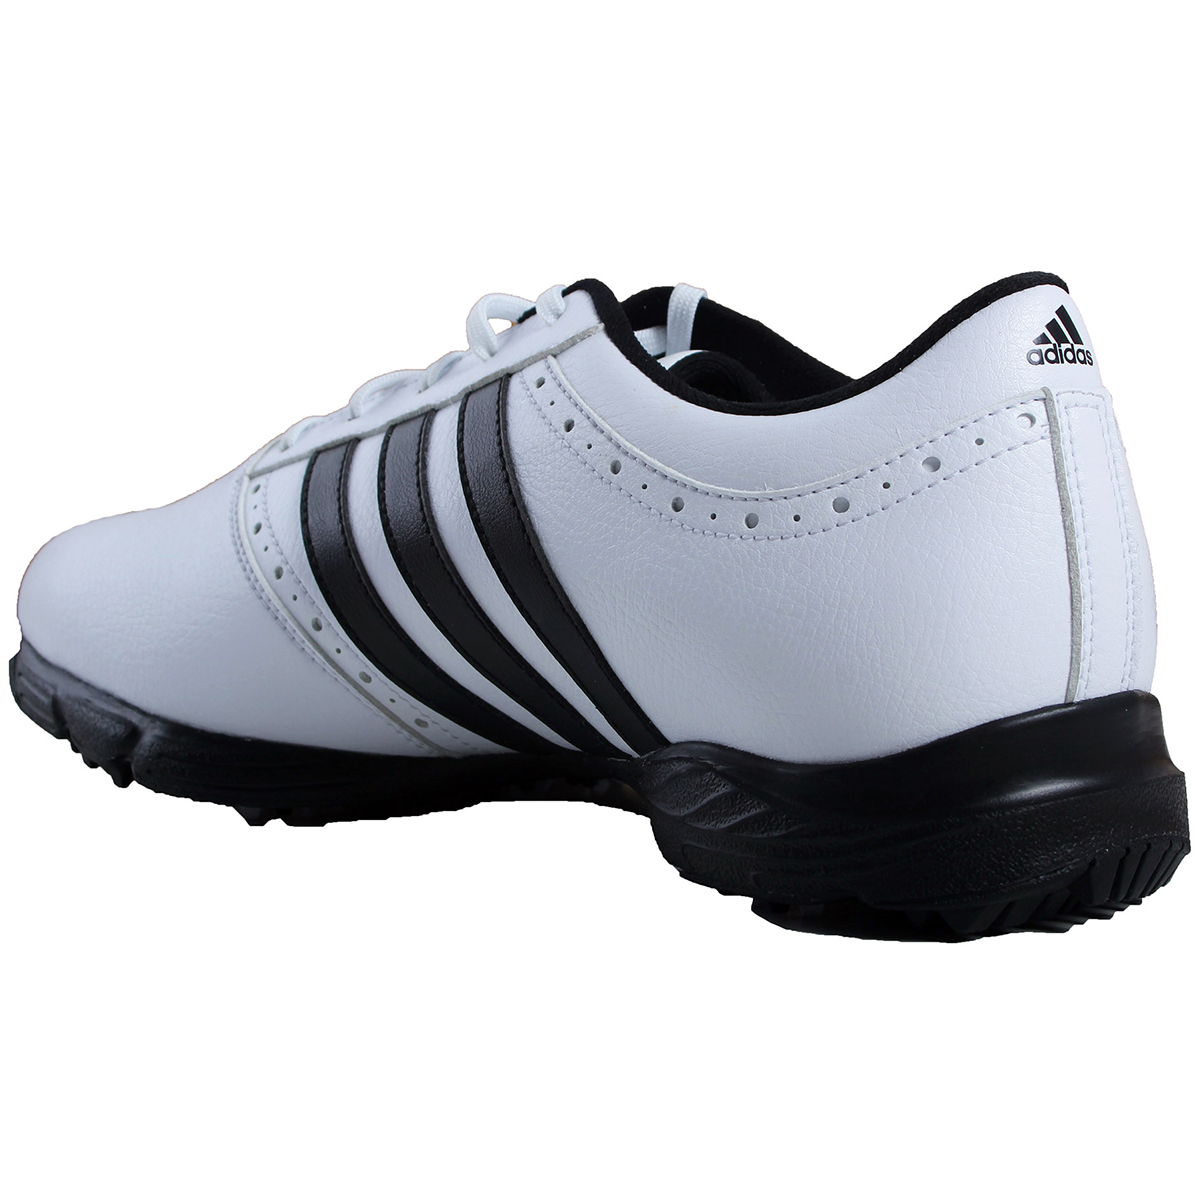 adidas traxion review